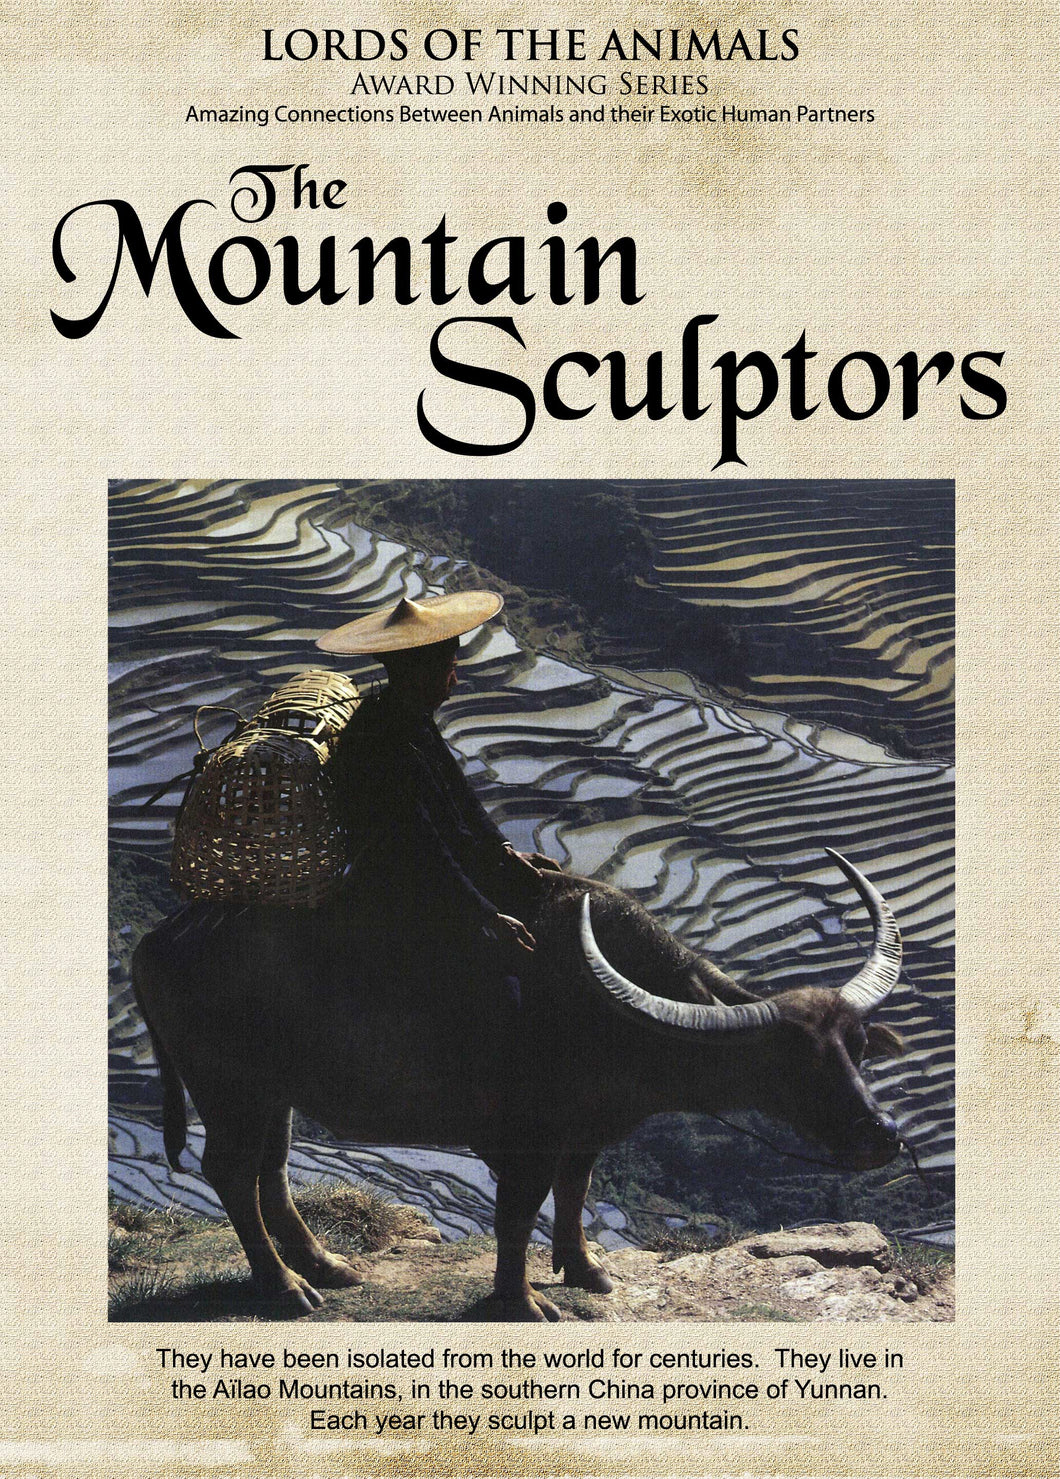 Lords of the Animals: The Mountain Sculptors